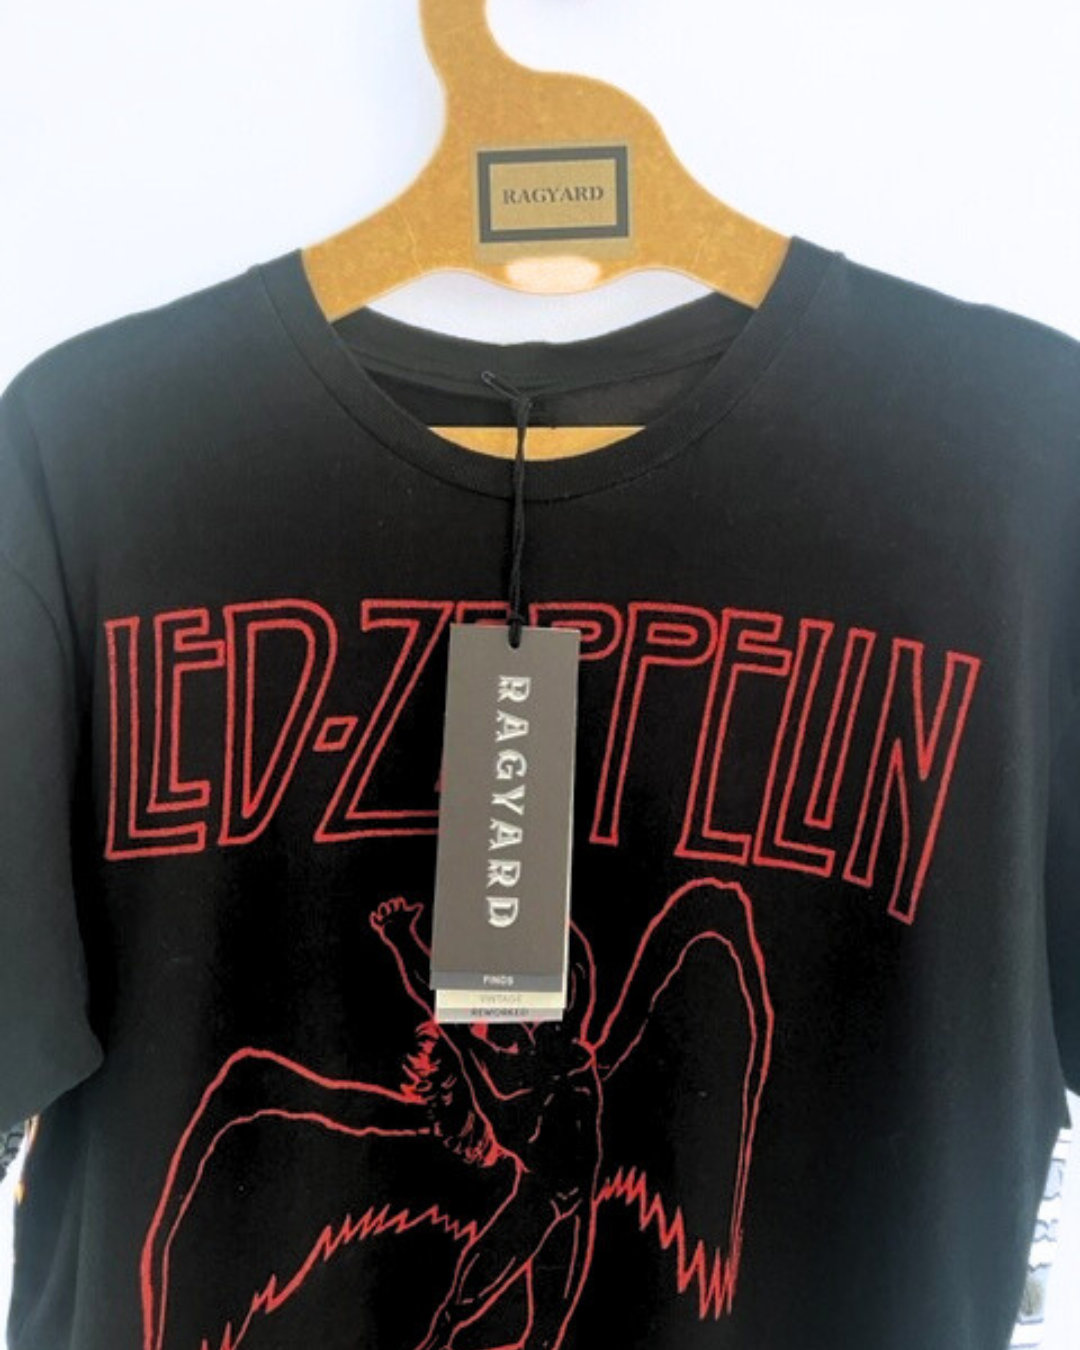 Vintage LED ZEPPELIN Band T-shirt with Patchwork band tee back